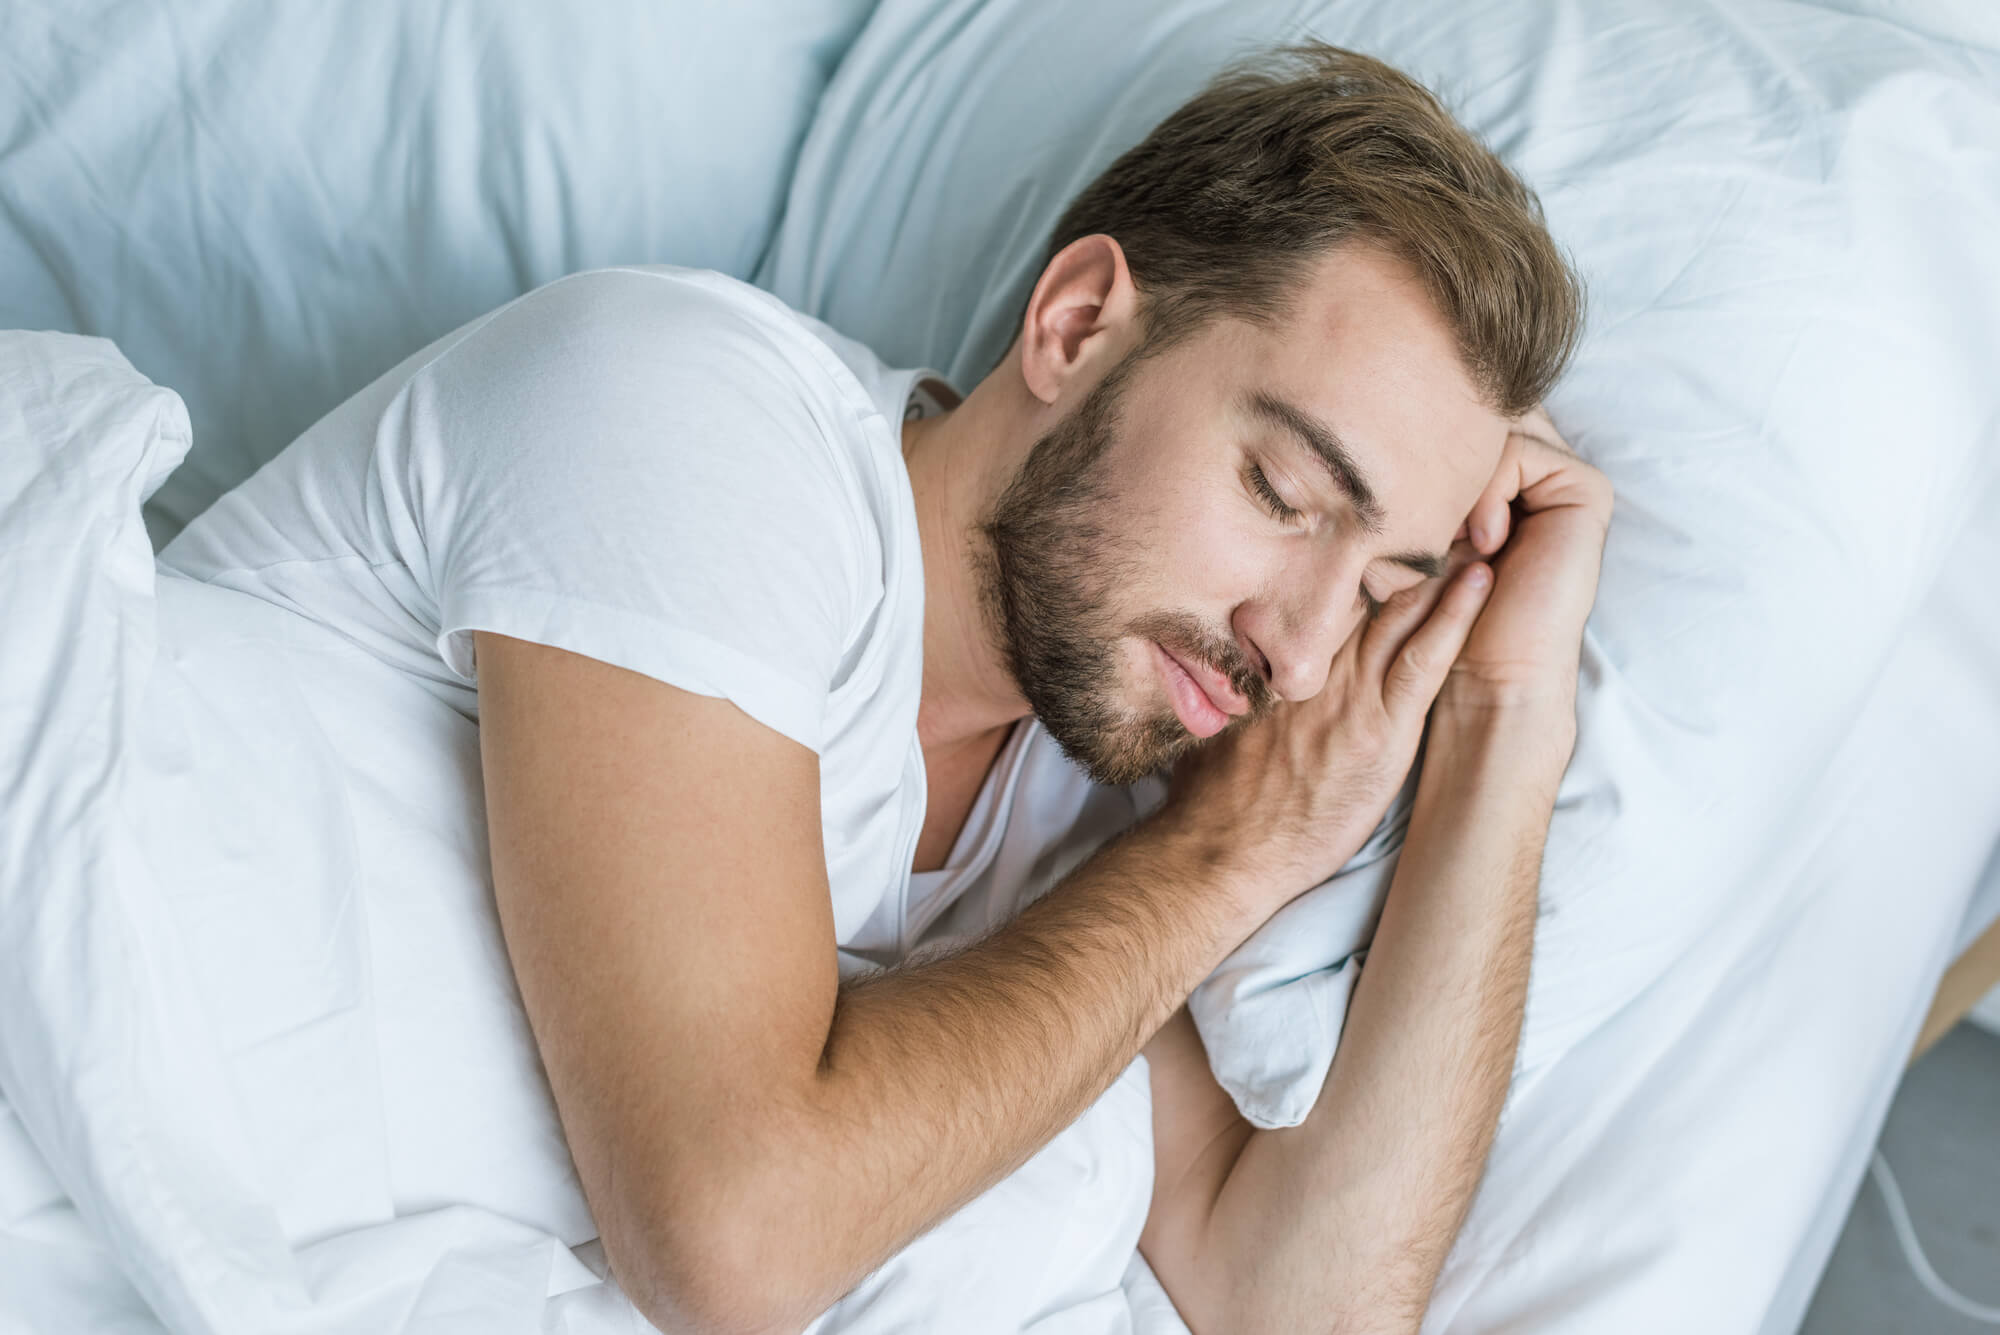 A man with a beard who wears a white t-shirt sleeps peacefully on white sheets.  Sleep and testosterone production have a strong connection.